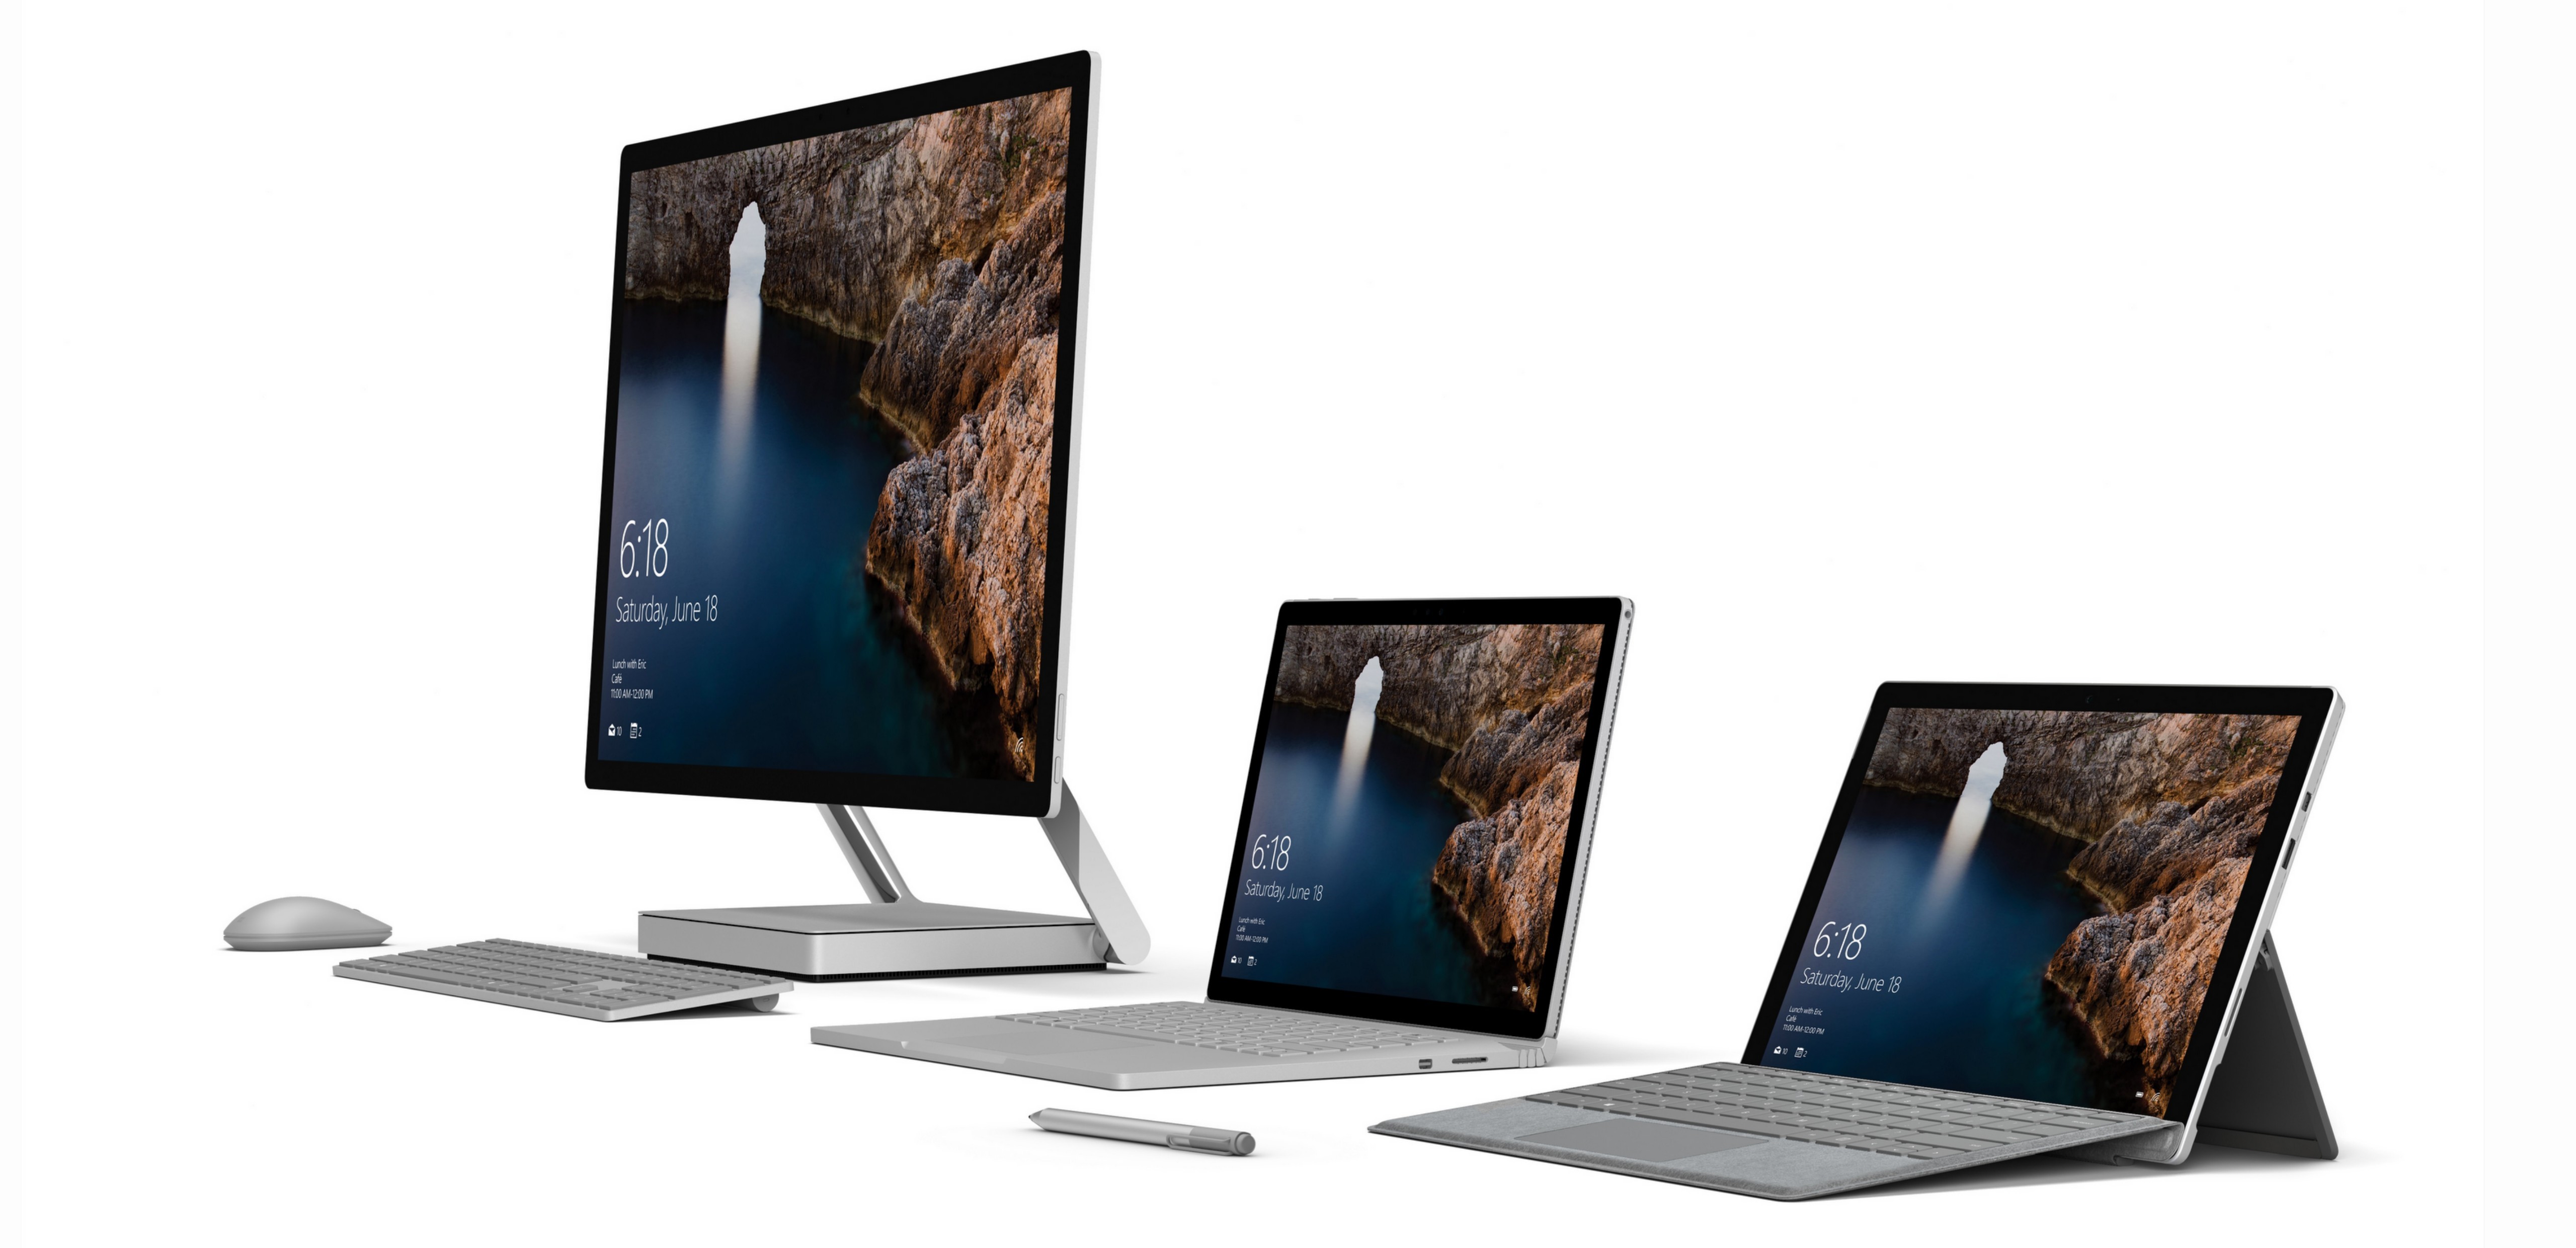 Surface family of devices including Surface Studio, Surface Book and Surface Pro 4